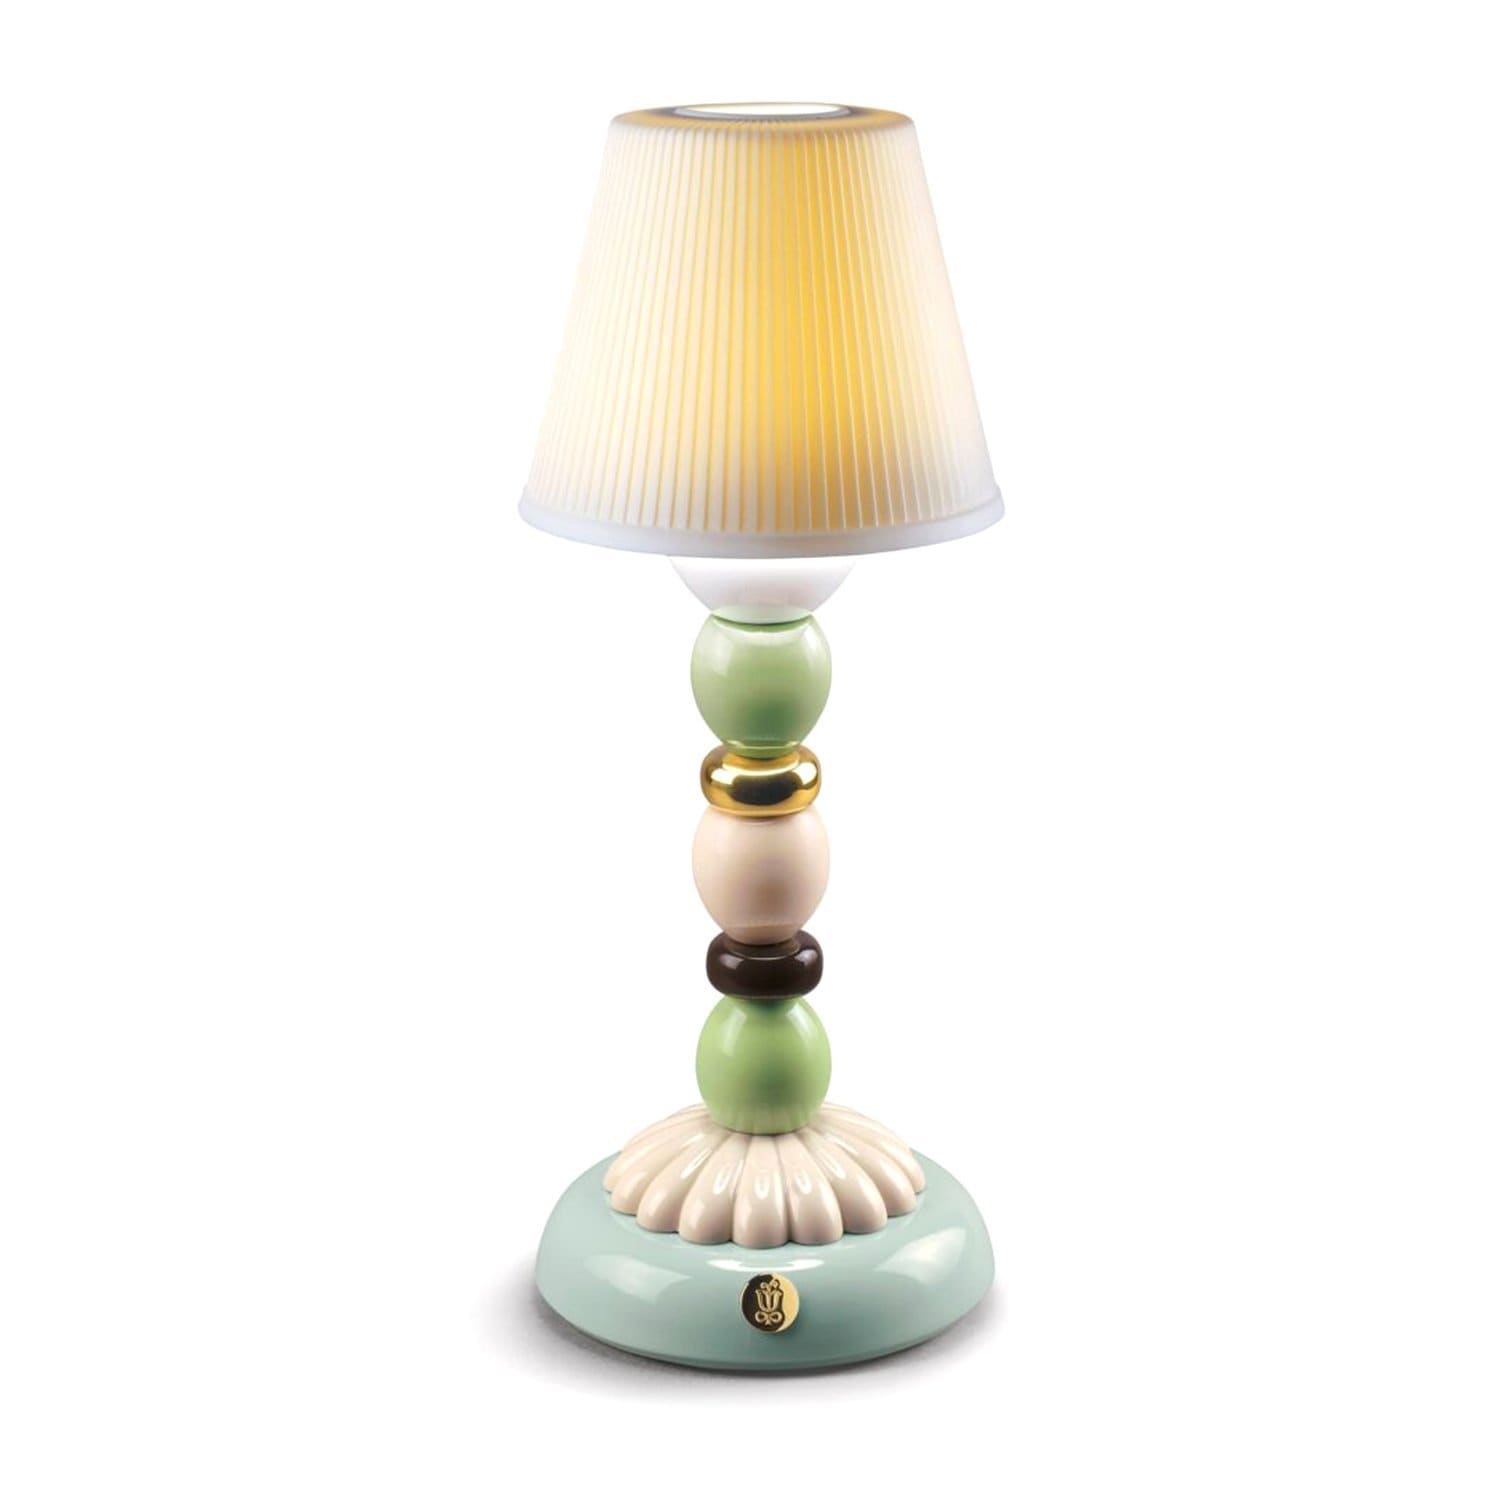 Lladro Palm Firefly Golden Fall Table Lamp - 1023793 - Jashanmal Home